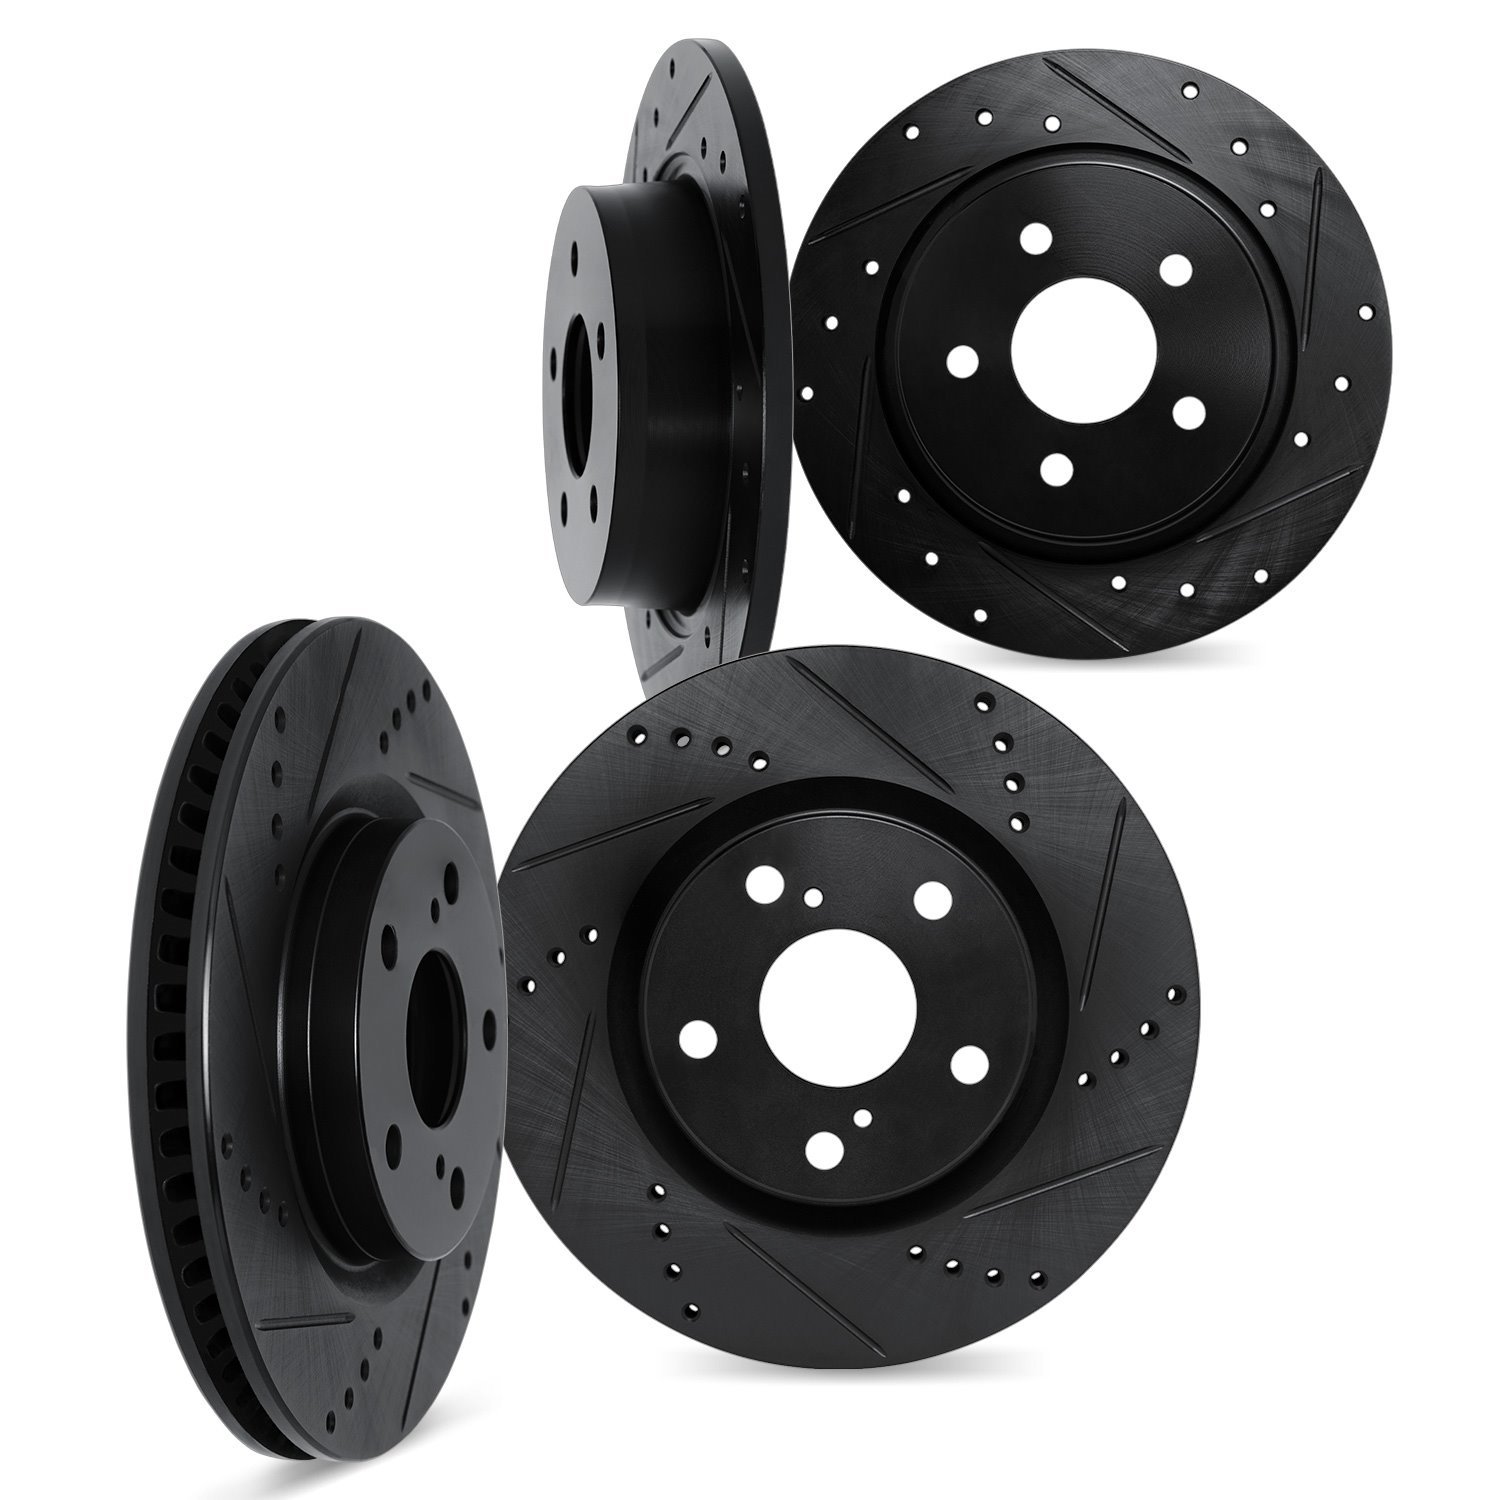 8004-01010 Drilled/Slotted Brake Rotors [Black], 2010-2013 Suzuki, Position: Front and Rear